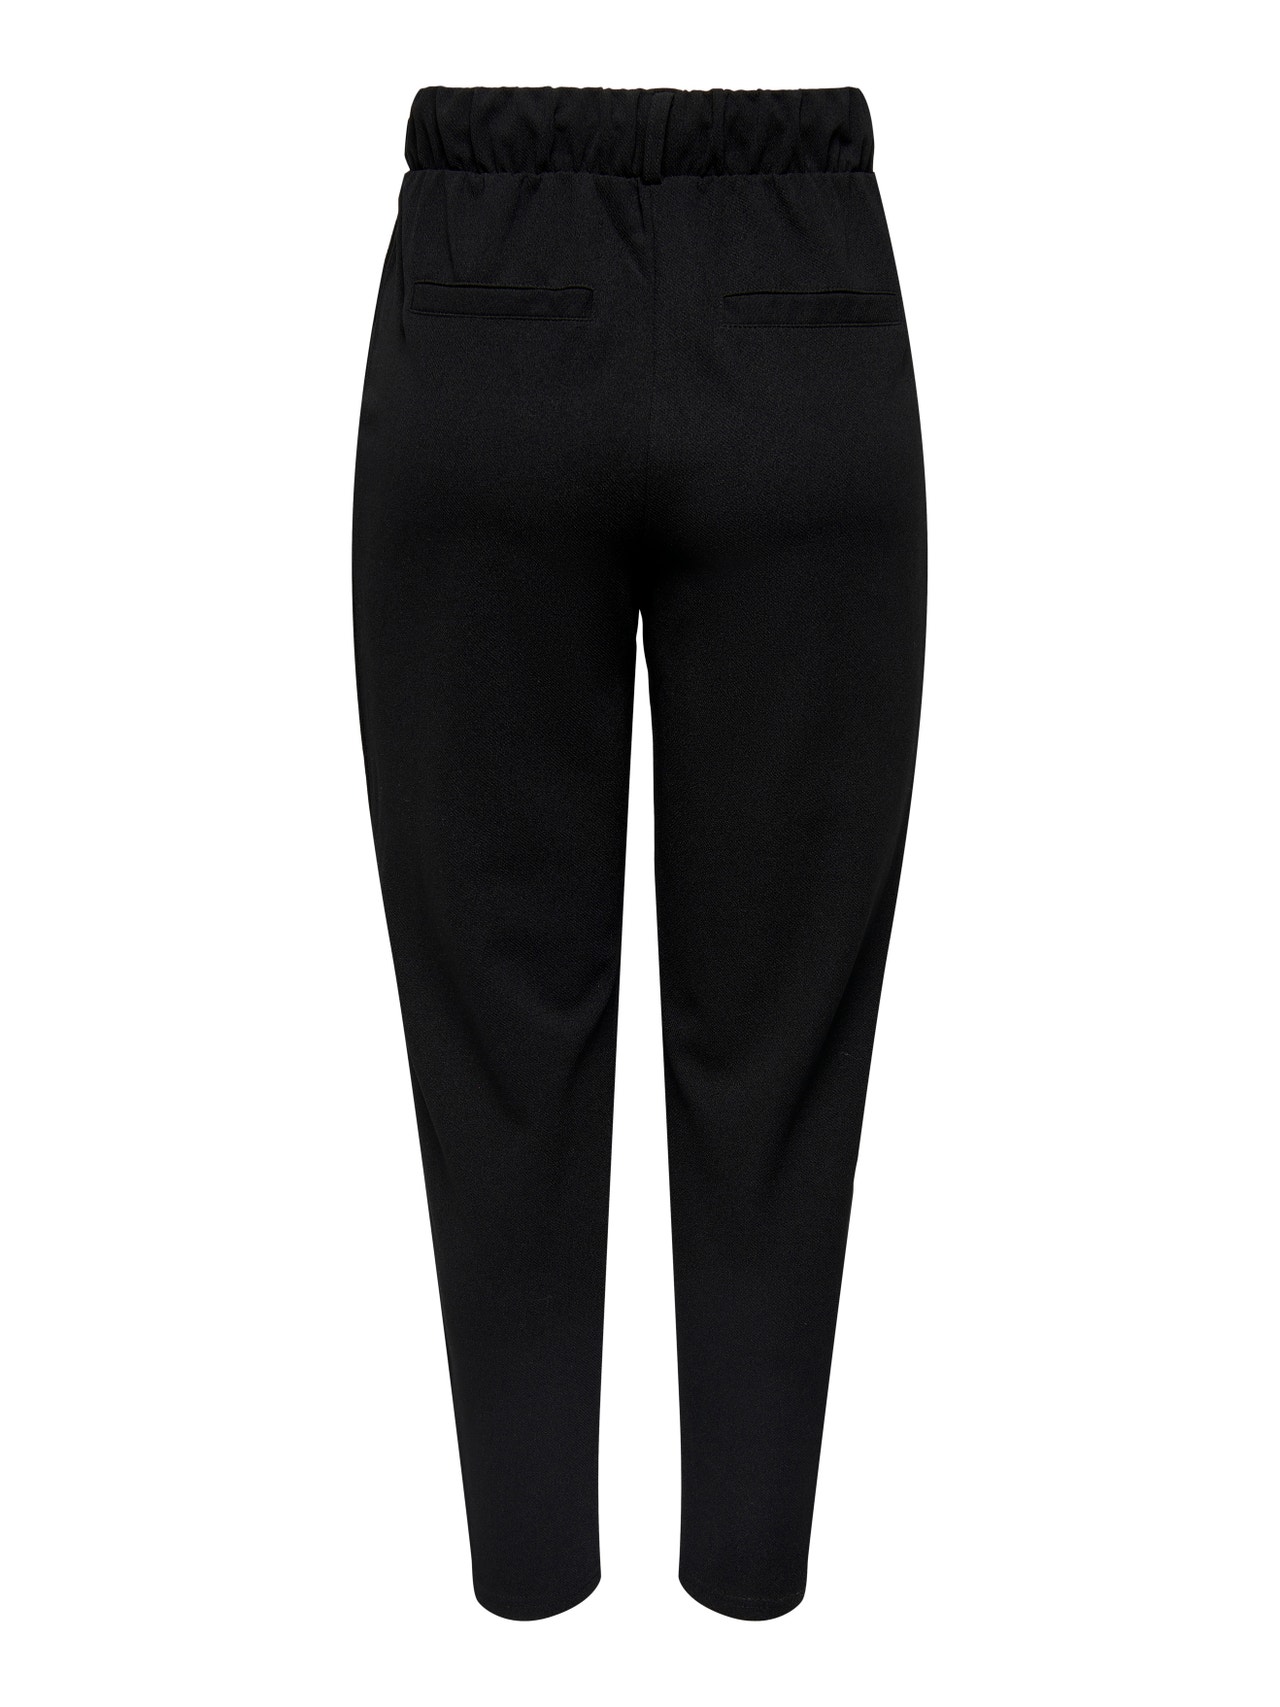 ONLY Ancle Trousers -Black - 15277597